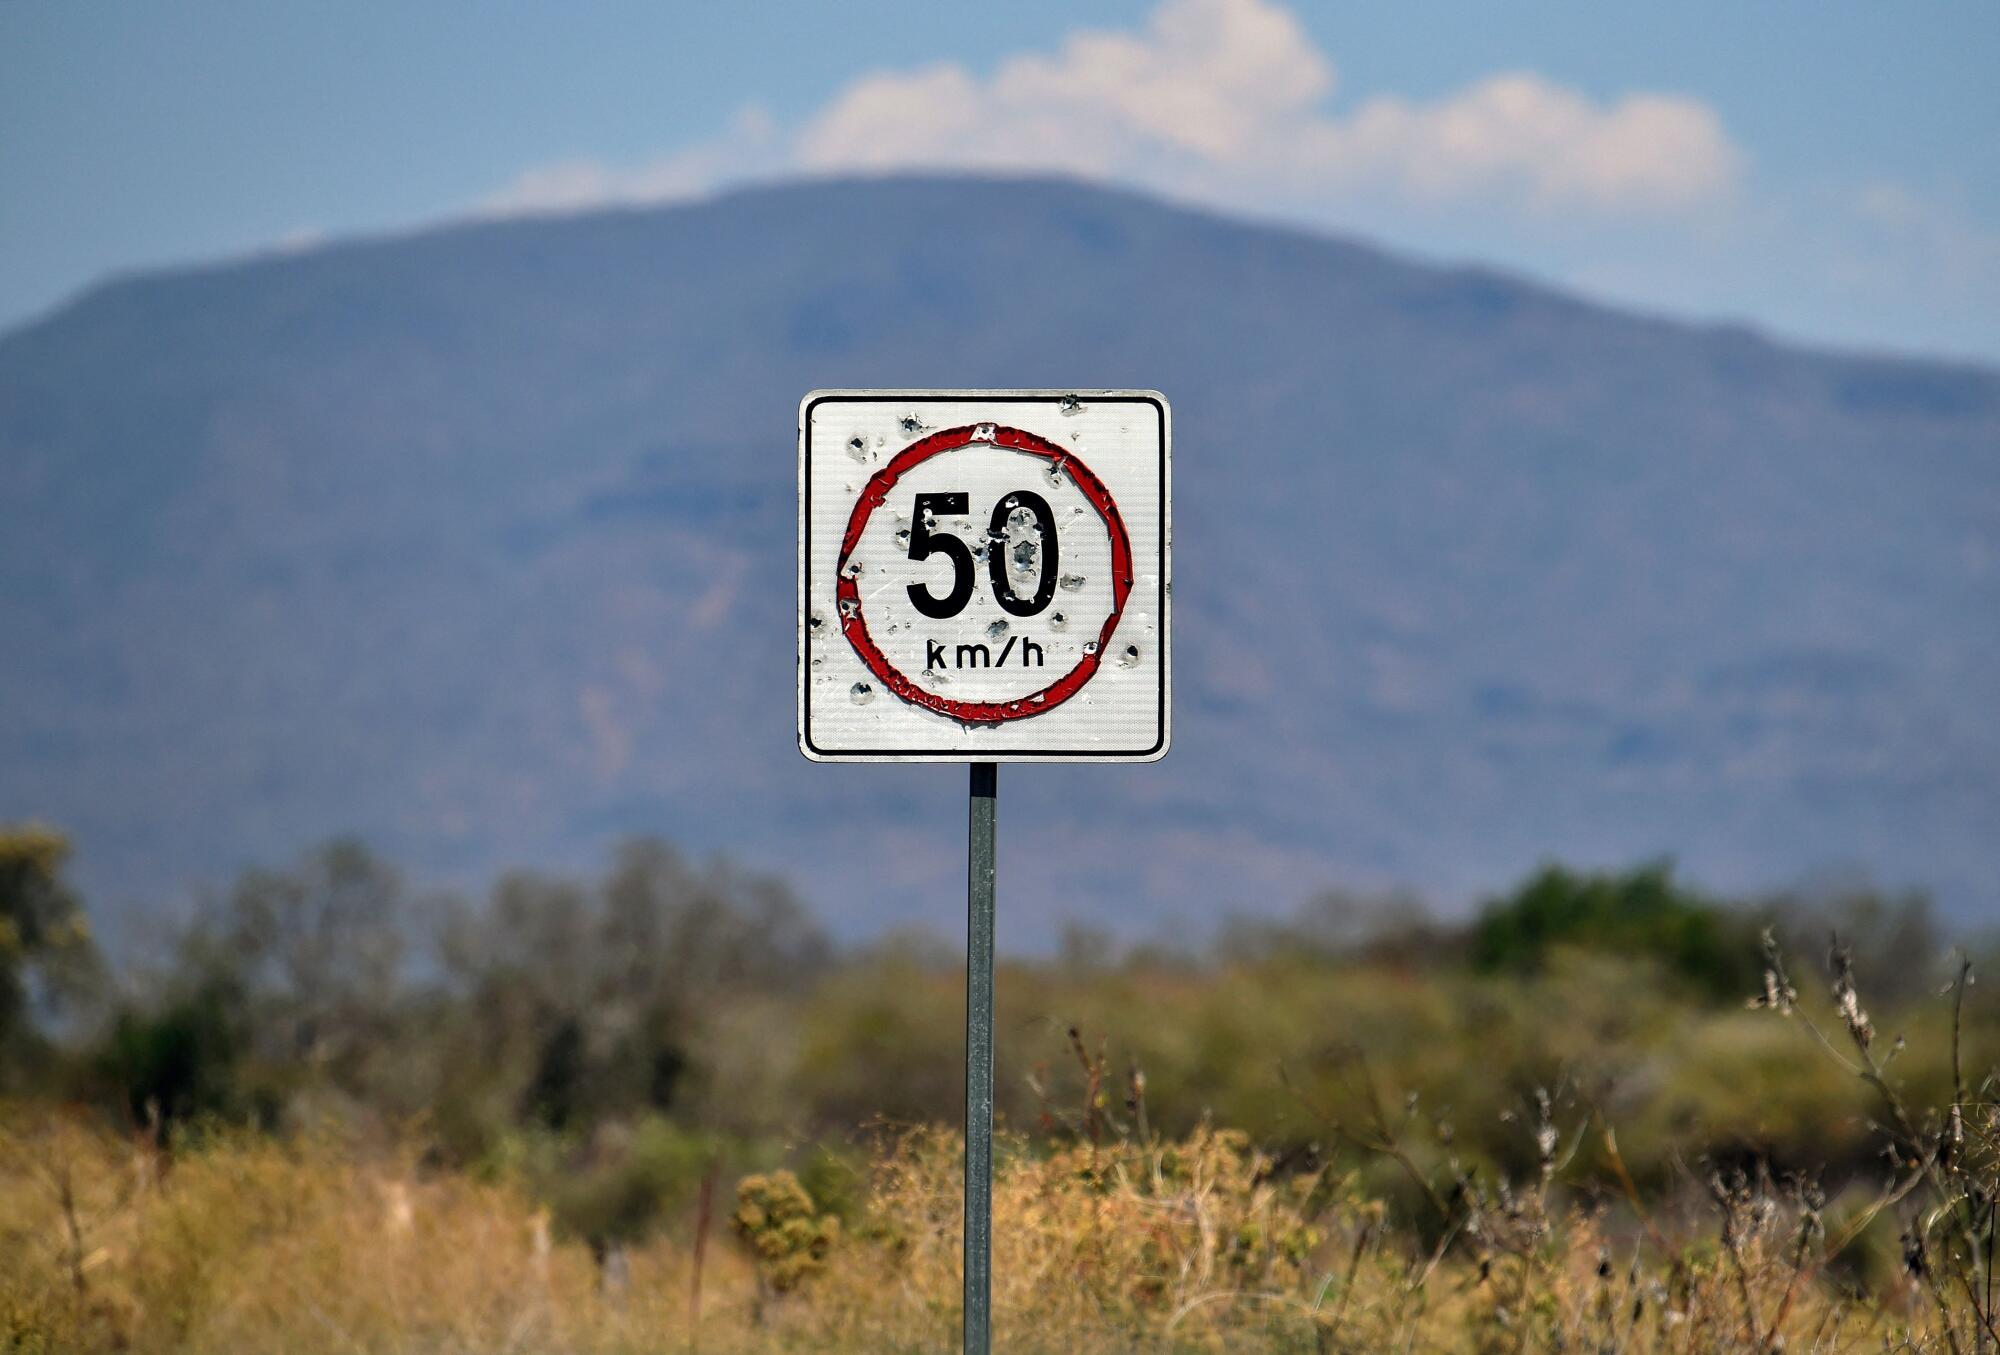 A speed limit sign is seen with bullet holes on the Buenavista Tomatlan - Aguililla highway, 